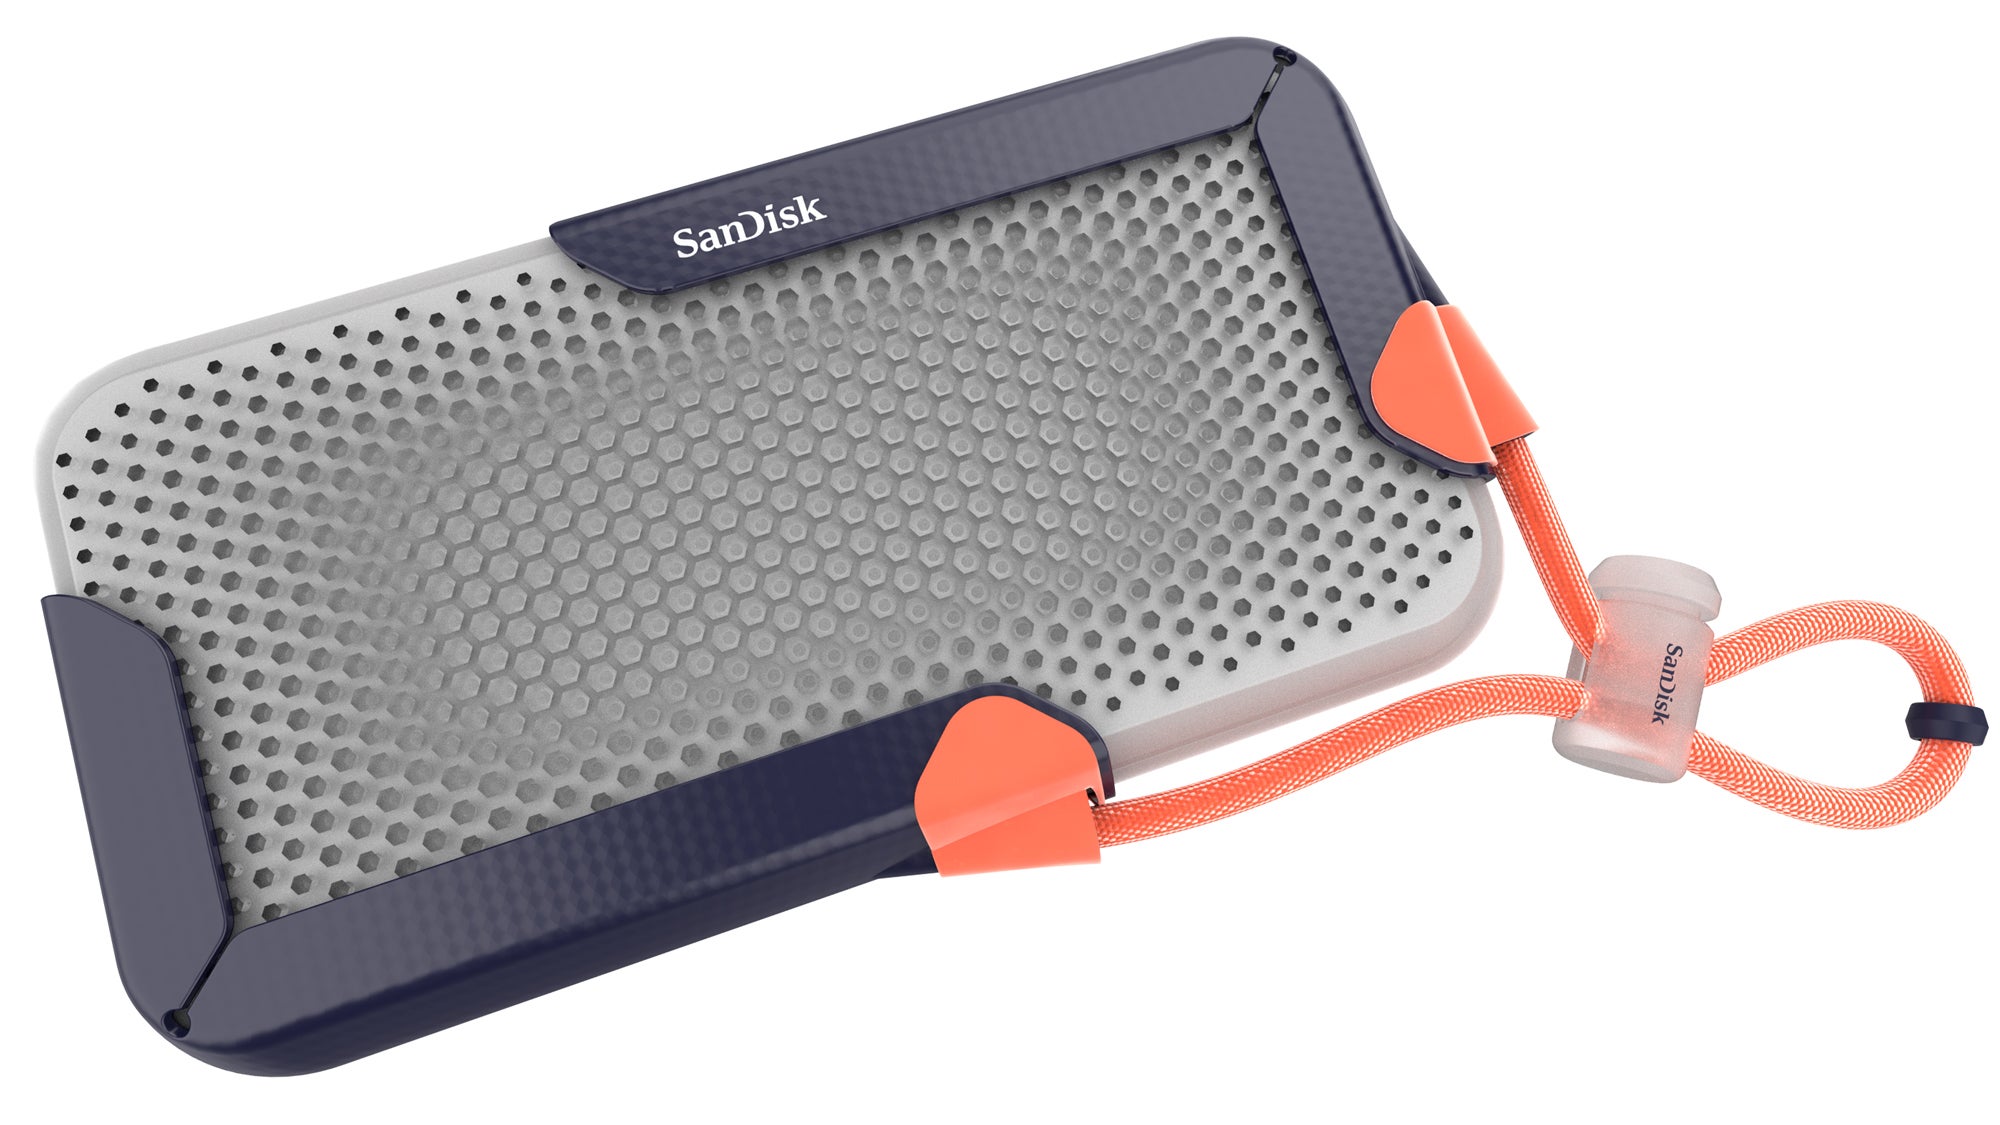 SanDisk Crammed A Colossal 8 Terabytes Into This Tiny SSD Drive